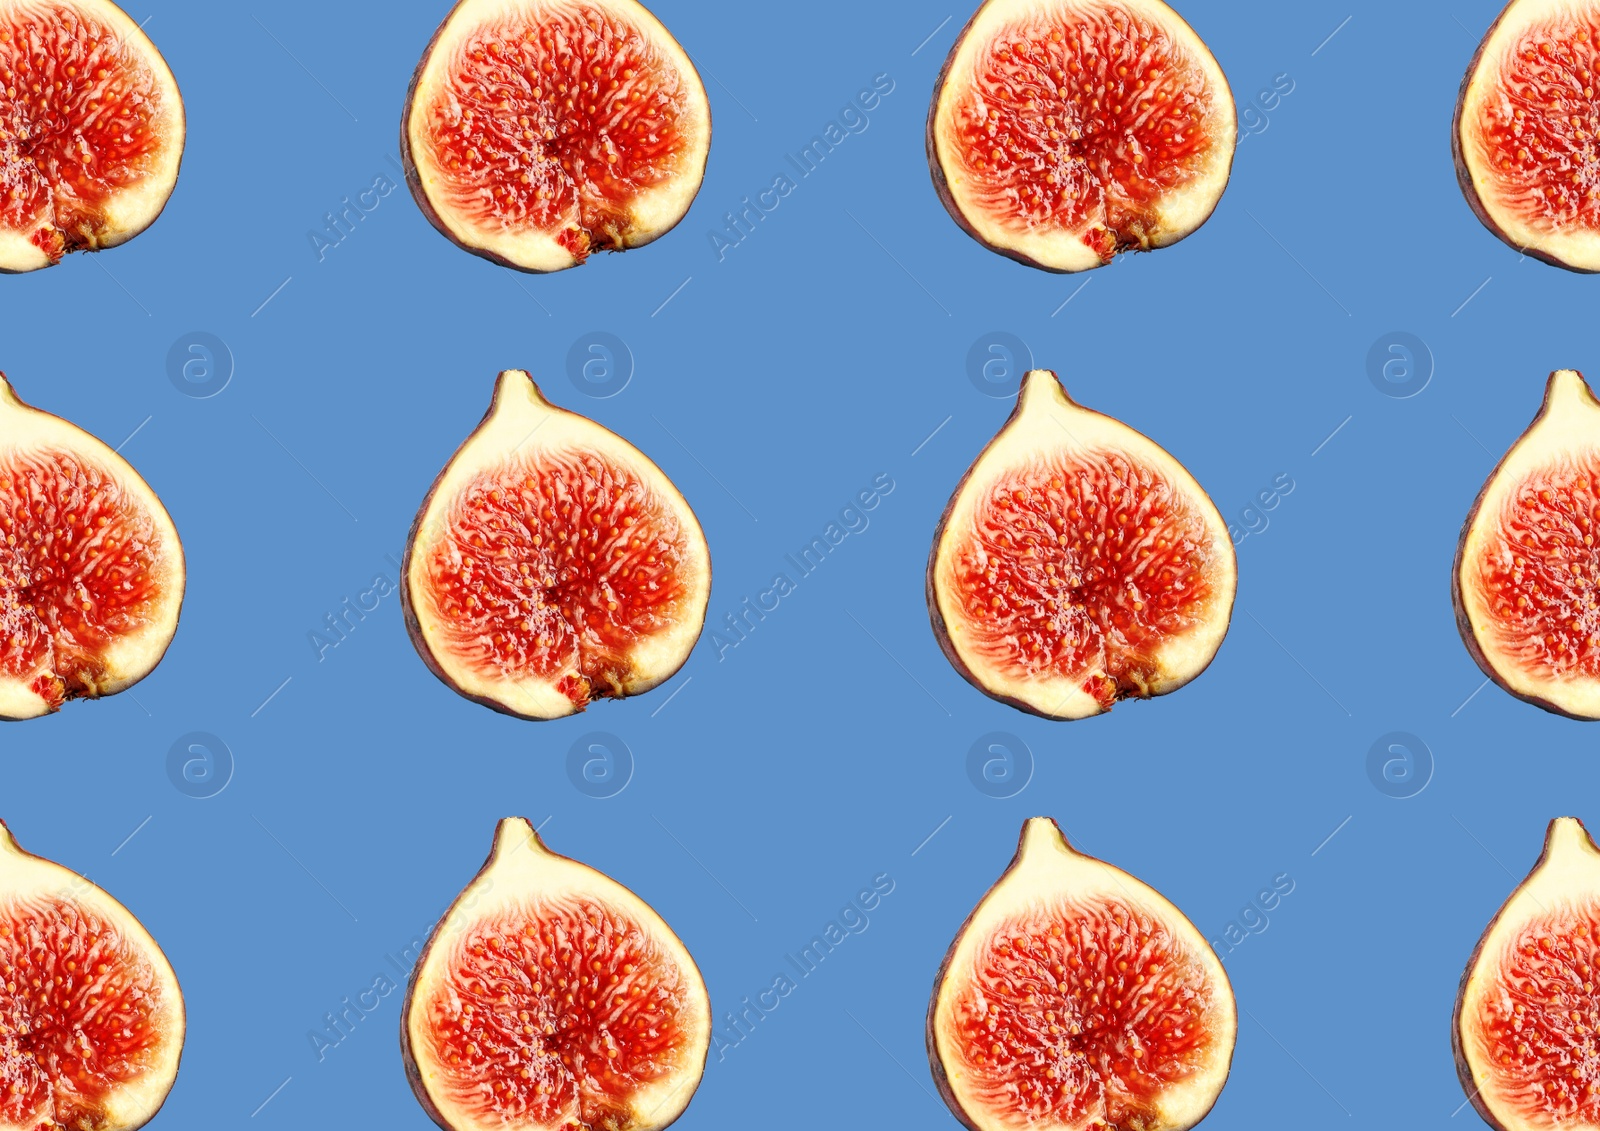 Image of Pattern of cut figs on blue background